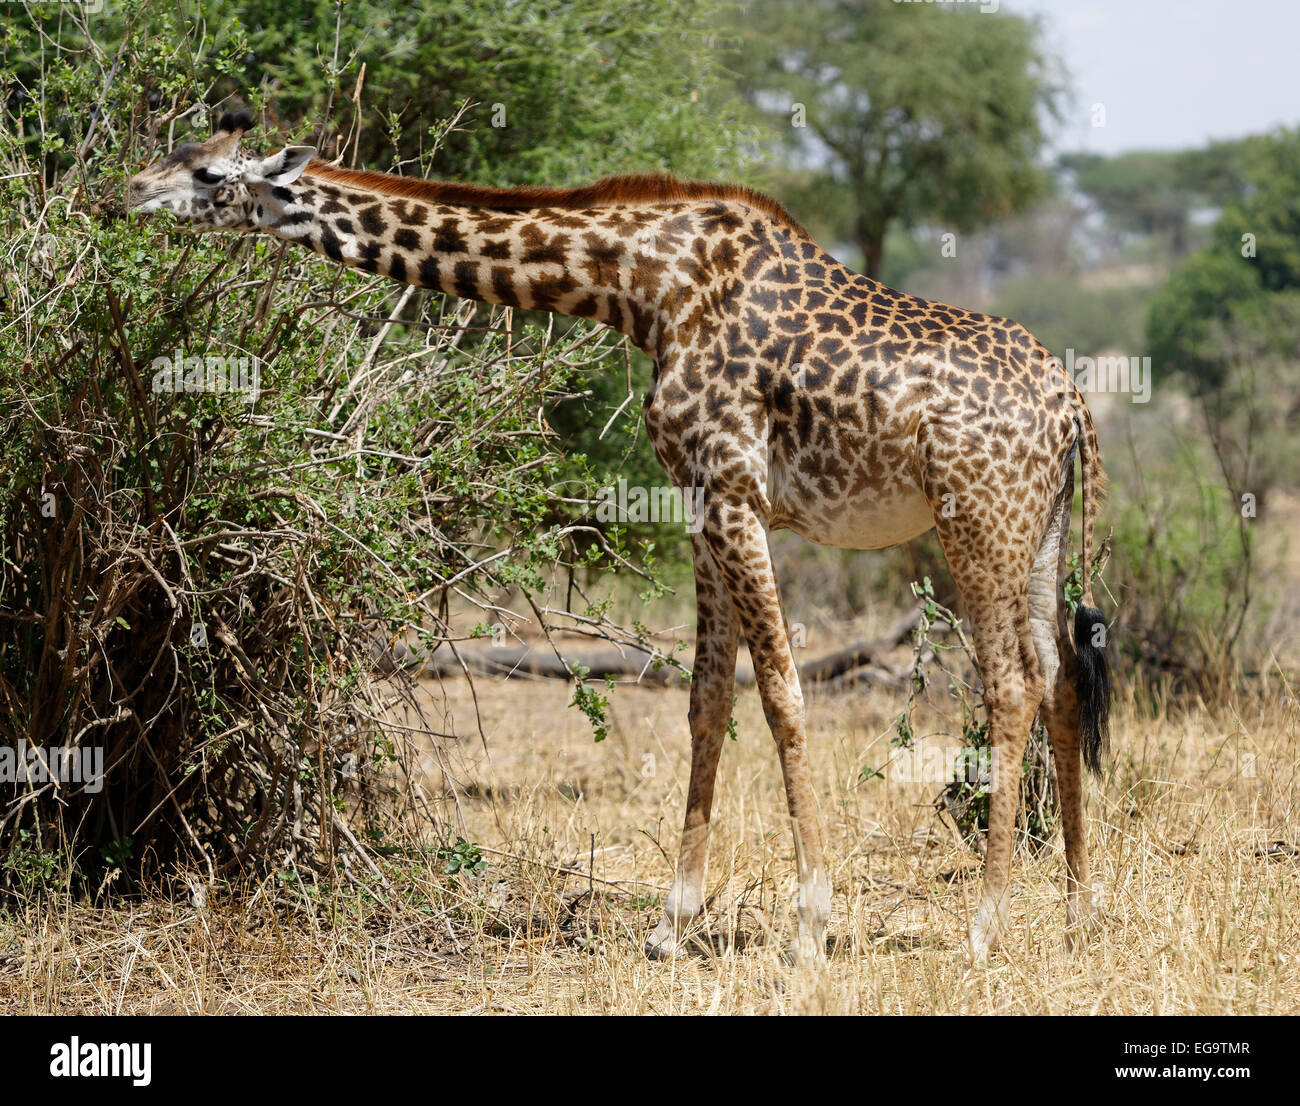 Giraffe eating leaves from a bush. - Tangire National Park - Tanzania, Africa. Stock Photo